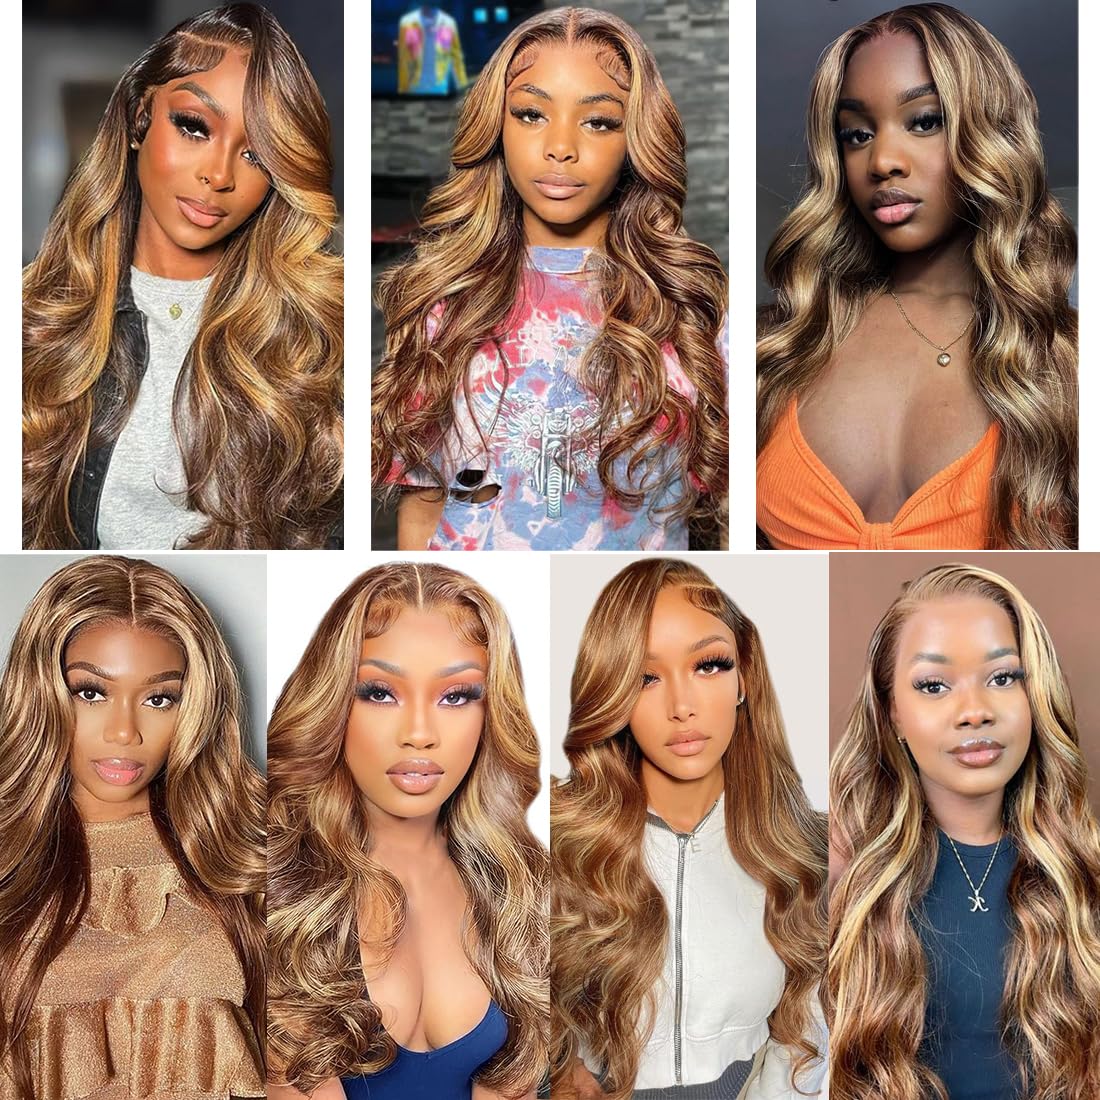 Beluck 13x6 Highlight Lace Front Wigs Human Hair Body Wave HD Lace Frontal Wigs 4/27 Honey Blonde Ombre Colored Human Hair Wigs for Women Pre Plucked